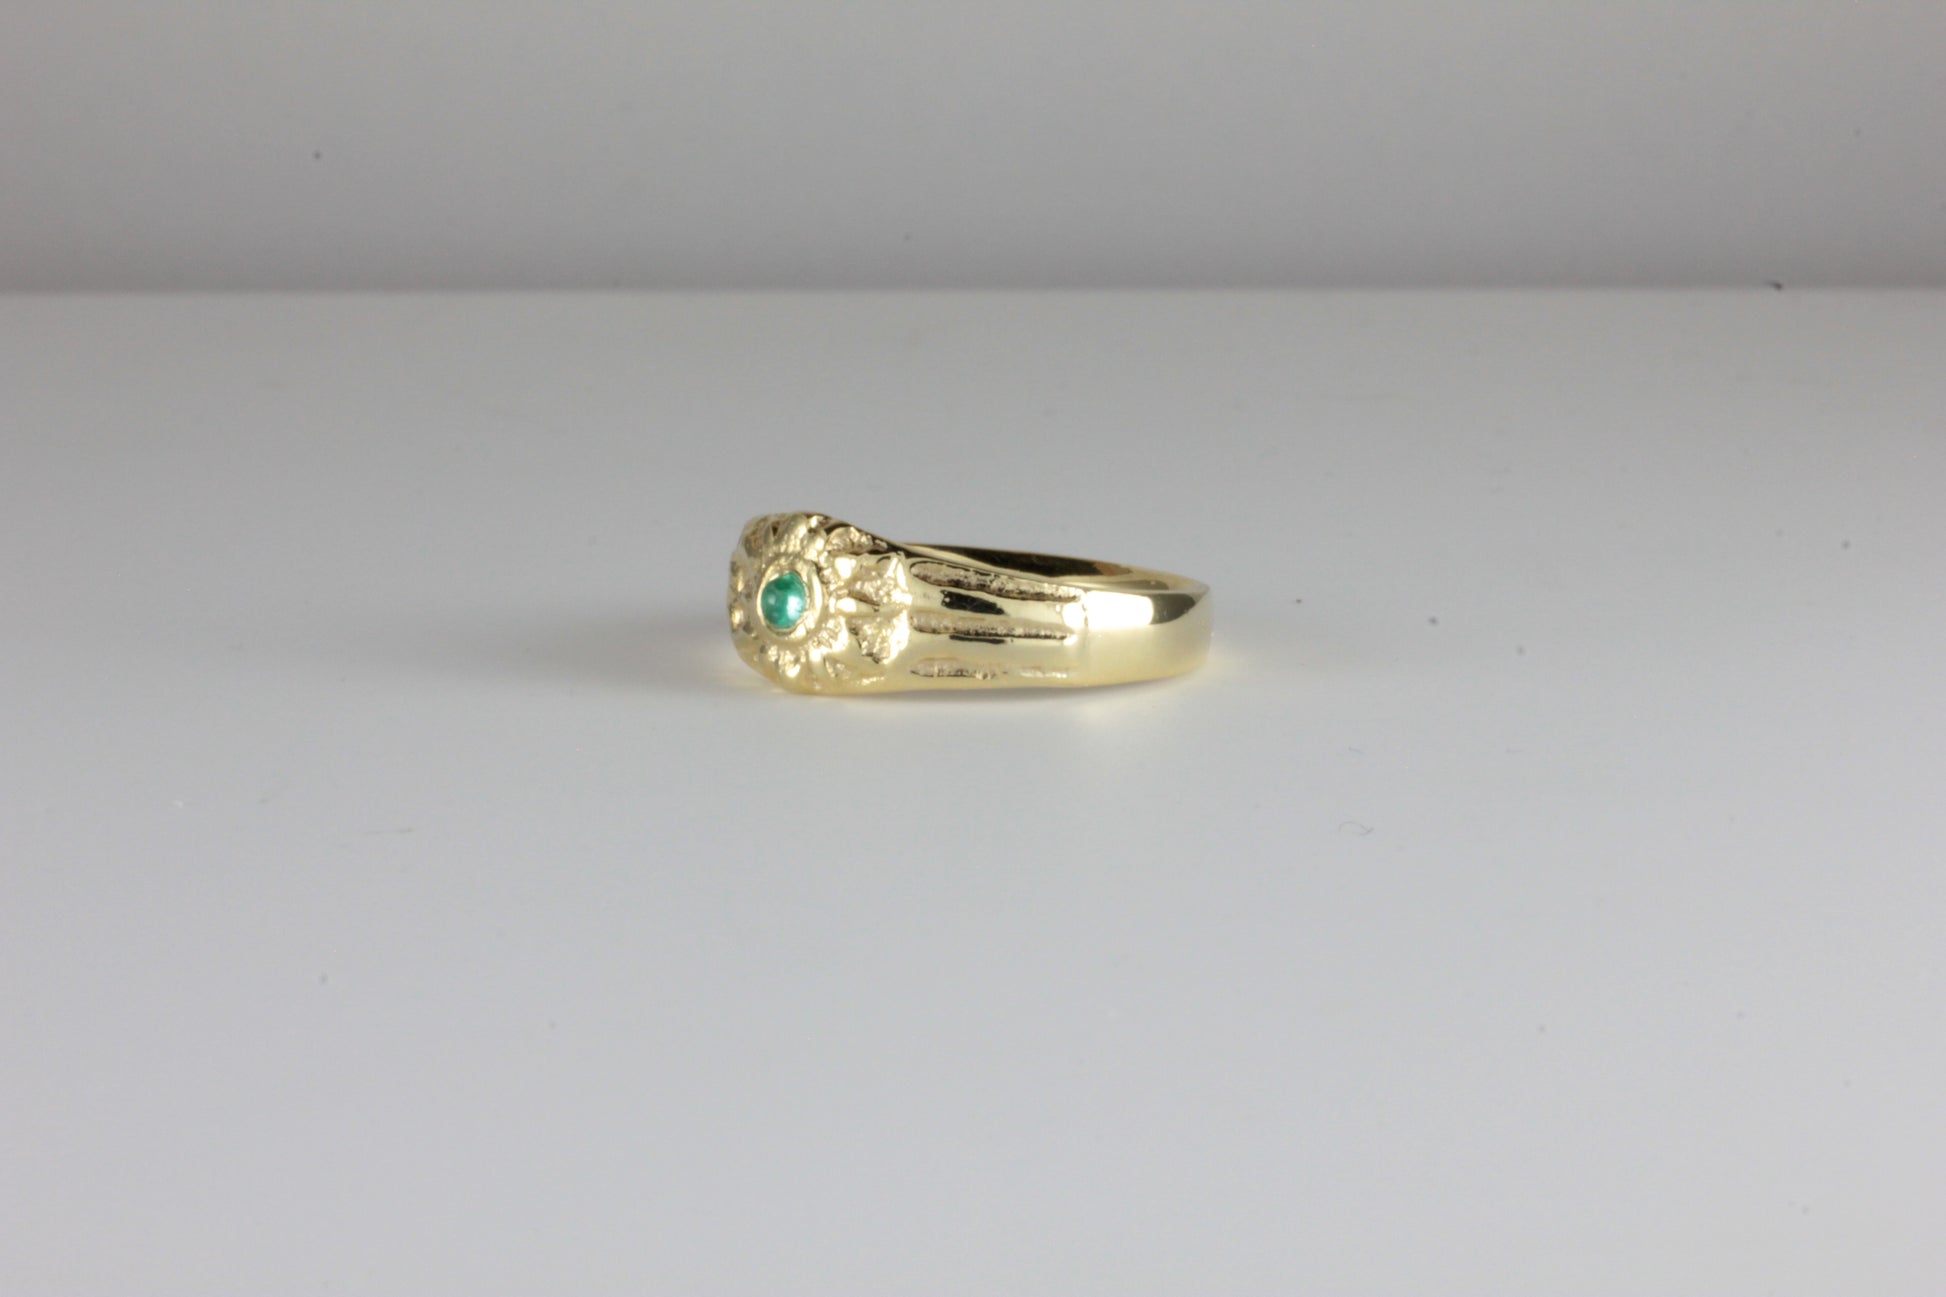 Medieval 22ct Gold and Emerald Sunburst Ring